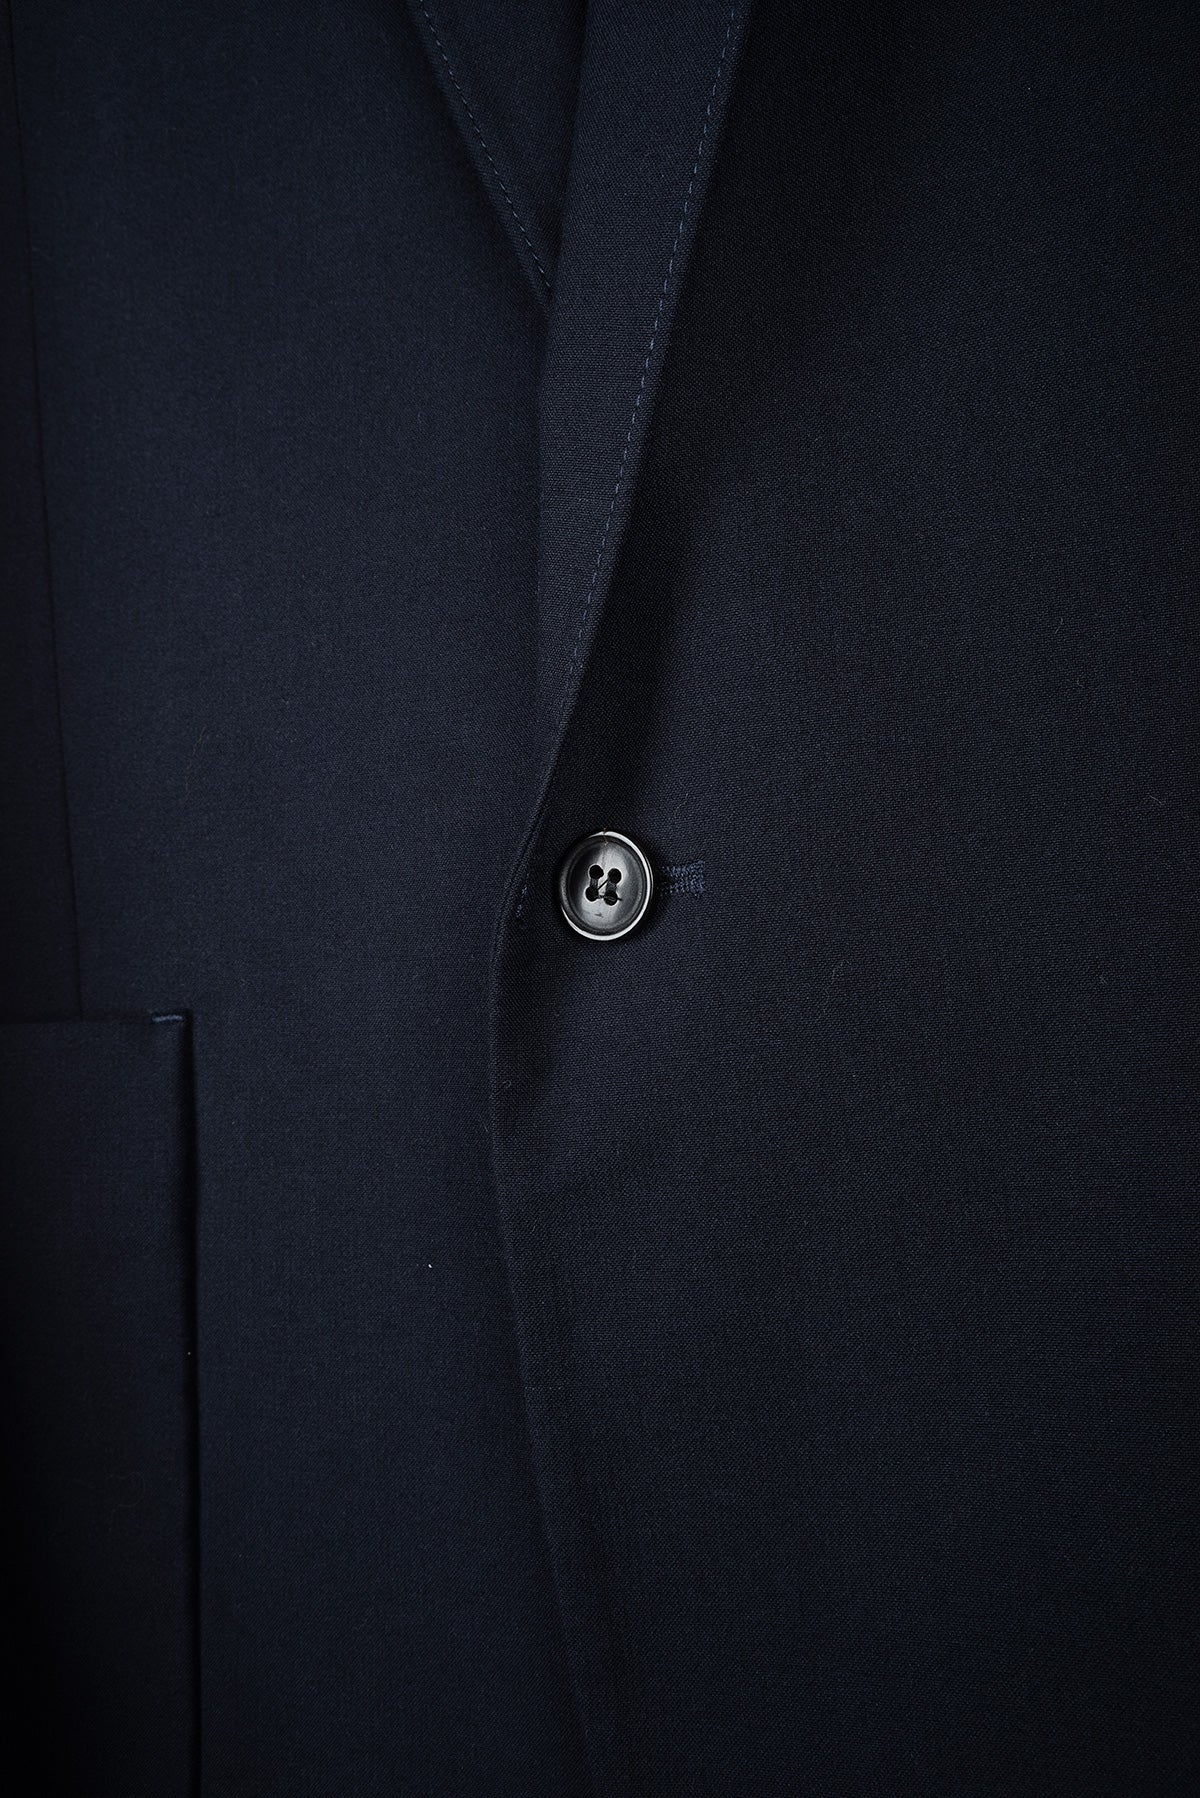 2013 S/S PATCH POCKET SUIT WITH ONE SIDE DYED AND COATED COTTON